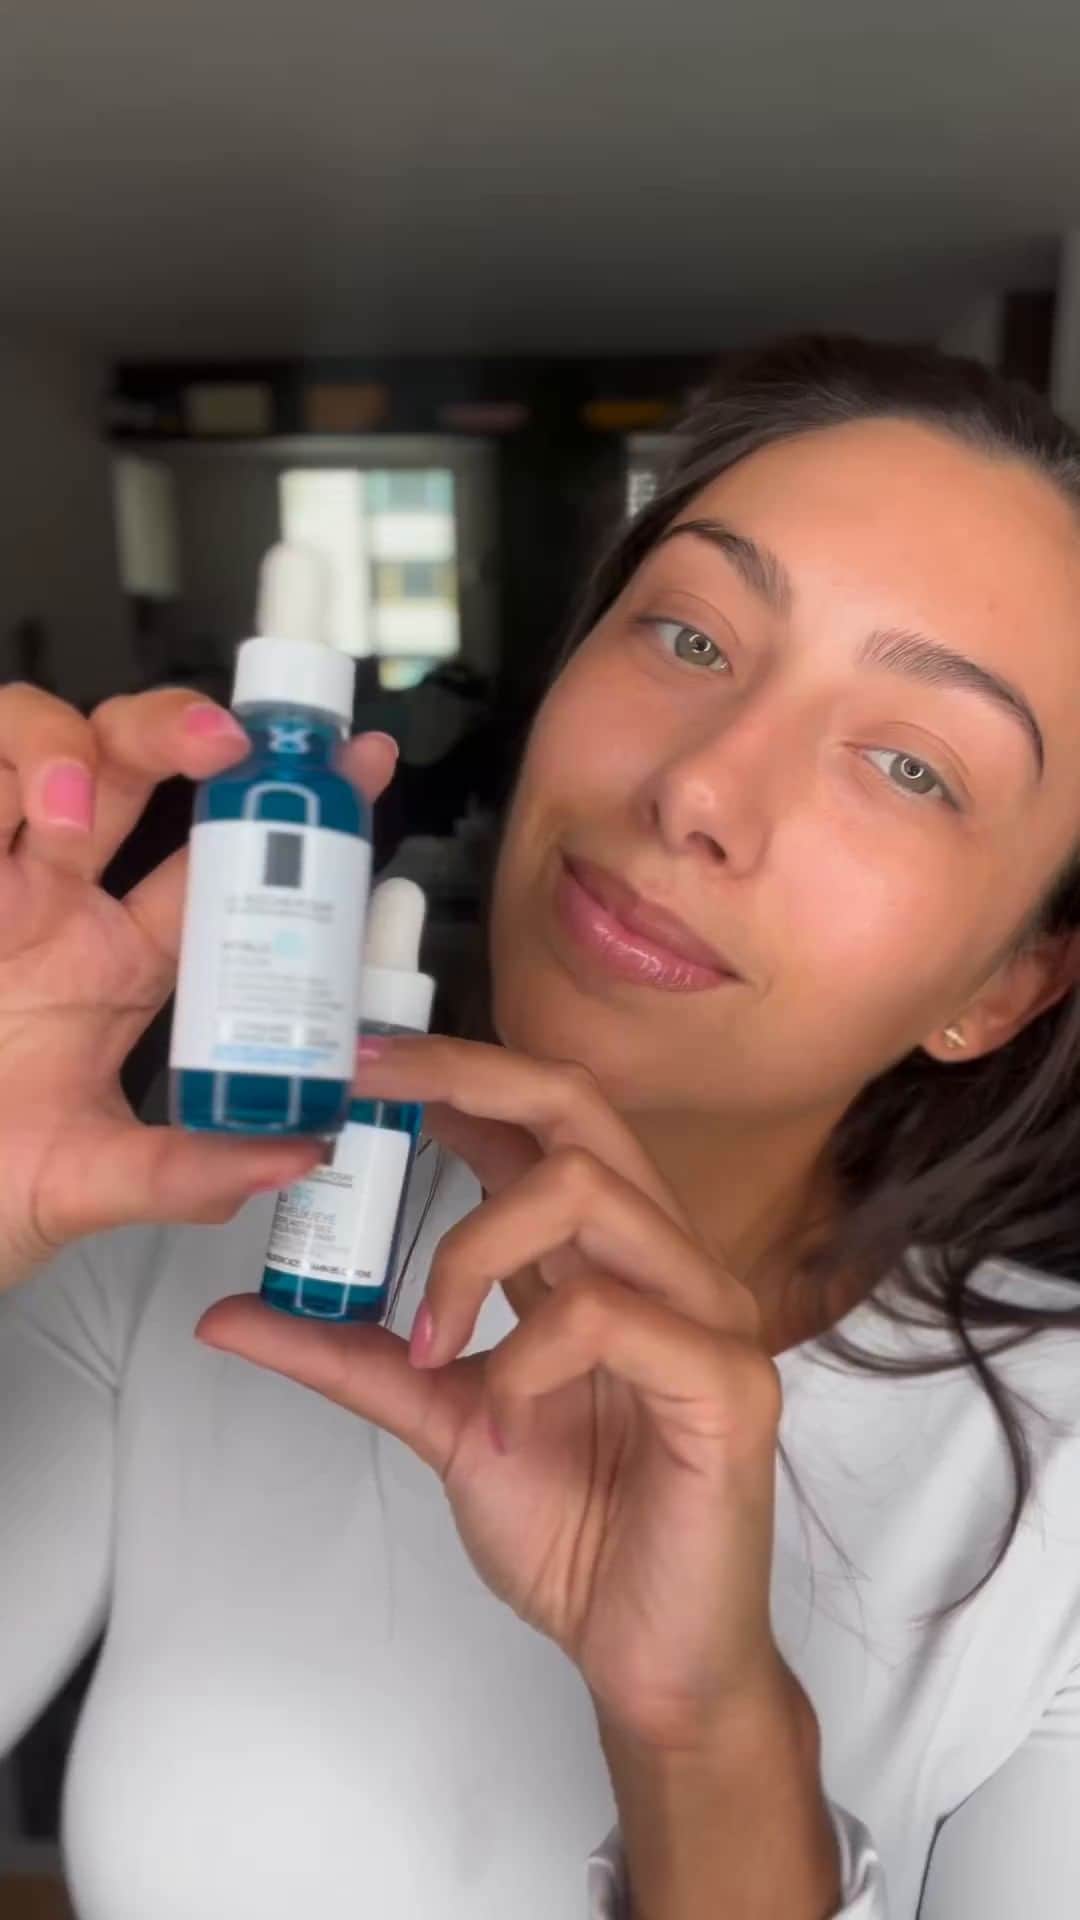 La Roche-Posayのインスタグラム：「@laura_caarolinaa shares her love for our Hyalu B5 eye serum and Hyalu B5 serum. 💙  ✨ Enriched with hyaluronic acid and vitamin B5 💧 Repairs and replumps the skin 👀 Reduces appearance of fine lines and wrinkles   Do you know anyone looking to hydrate their skin? Tag them below!   All languages spoken here! Feel free to talk to us at anytime. #larocheposay #LRPlove #hyaluB5 #hyaluronicacid #serum #antiageing #sensitiveskin Global official page from La Roche-Posay, France.」